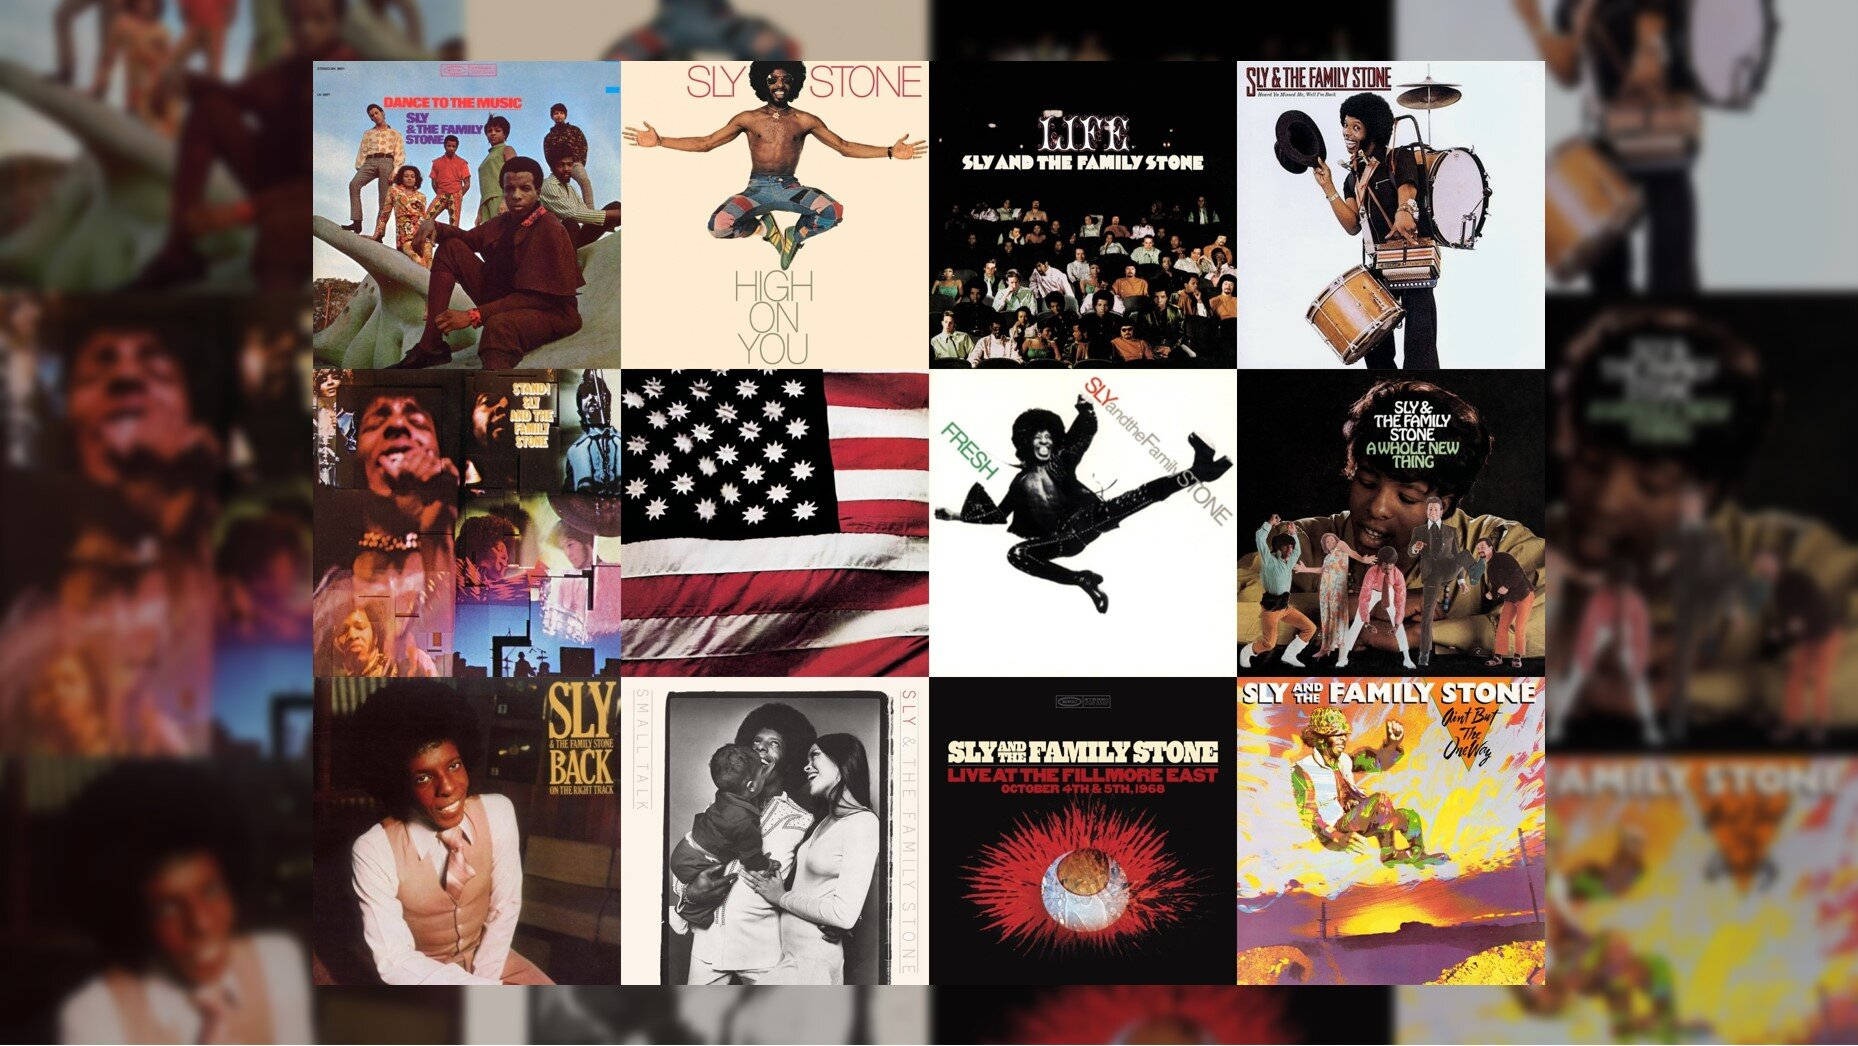 Sly And The Family Stone Throughout The Years Wallpaper